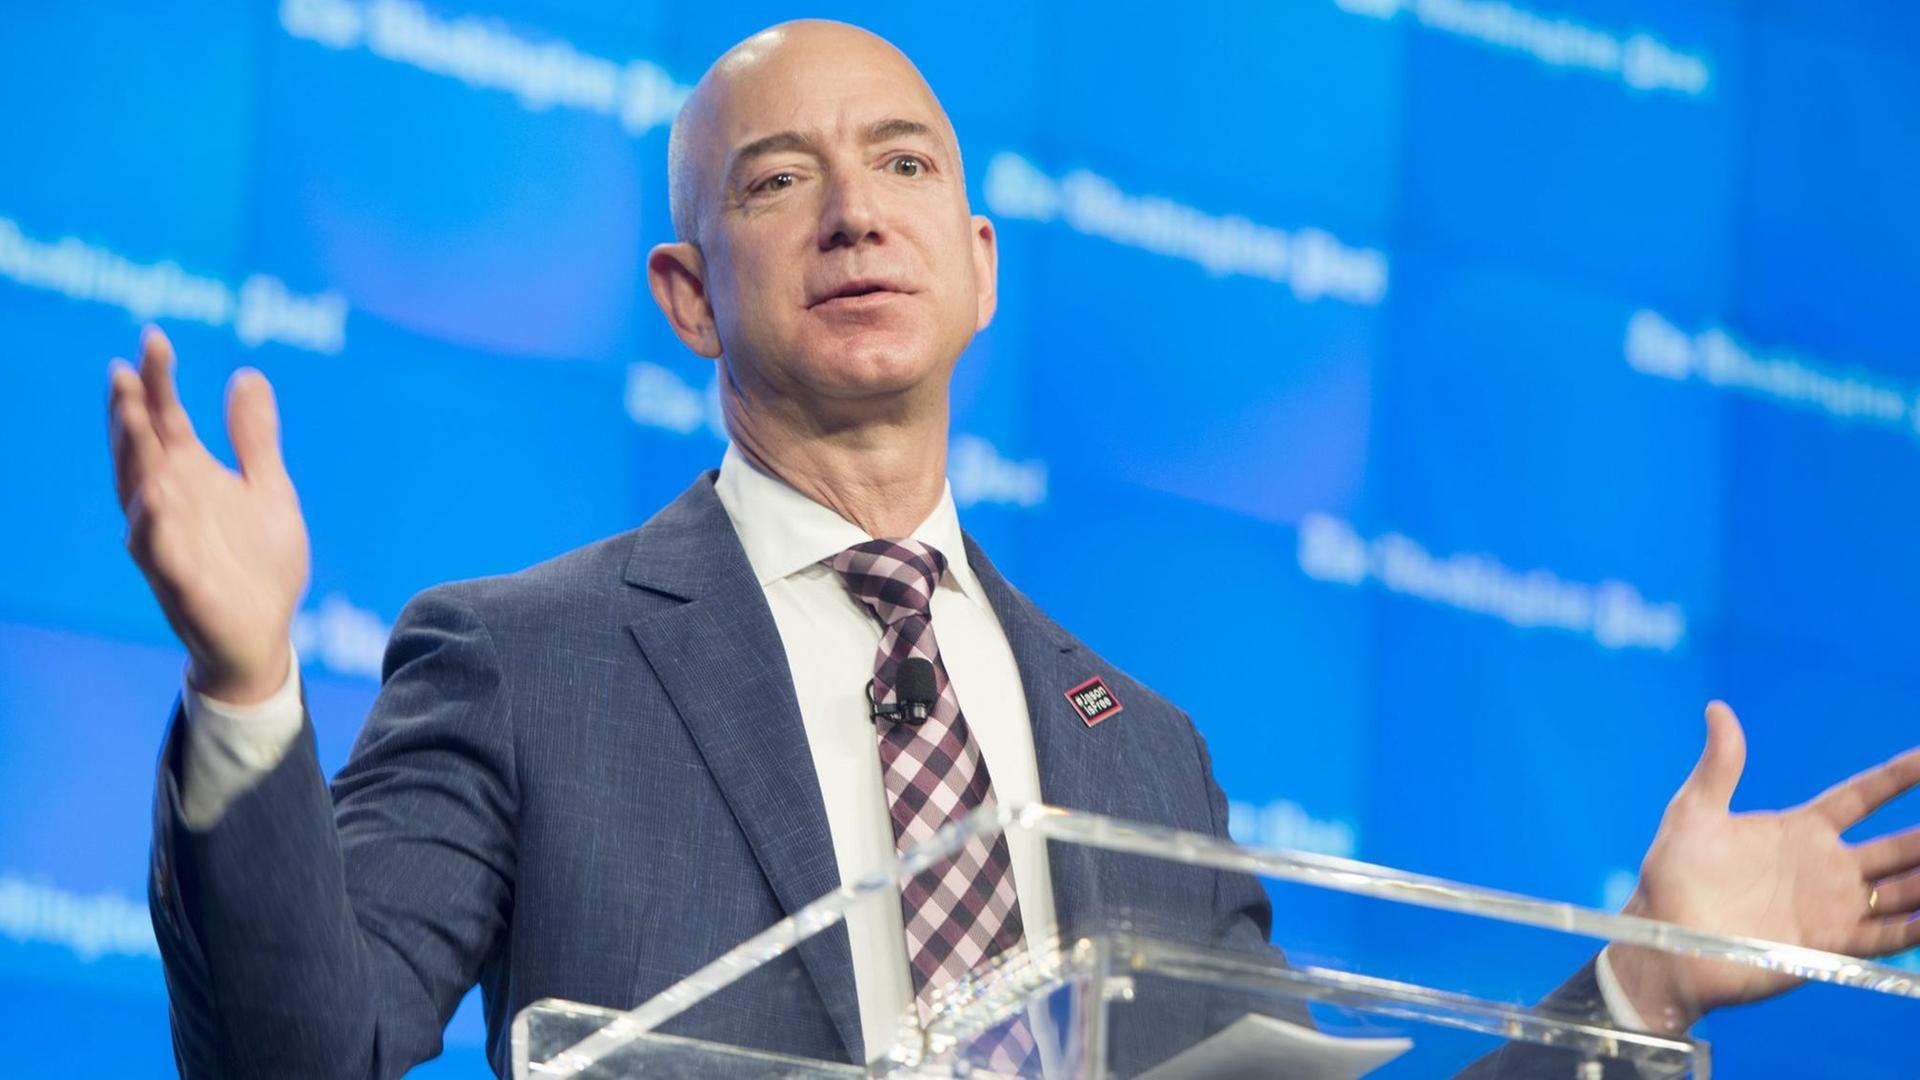 Jeff Bezos, Amazon-Gründer und Besitzer der "Washington Post", hält im Januar 2016 eine Rede. epa05446909 (FILE) A file photograph showing owner of the Washington Post and founder of Amazon, Jeff Bezos, delivering remarks at an event celebrating the new location of the Washington Post in Washington, DC, USA, 28 January 2016. US media business communicator Forbes reports on 29 July 2016 that Jeff Bezos, is the world's third richest person. EPA/MICHAEL REYNOLDS *** Local Caption *** 52558235 |